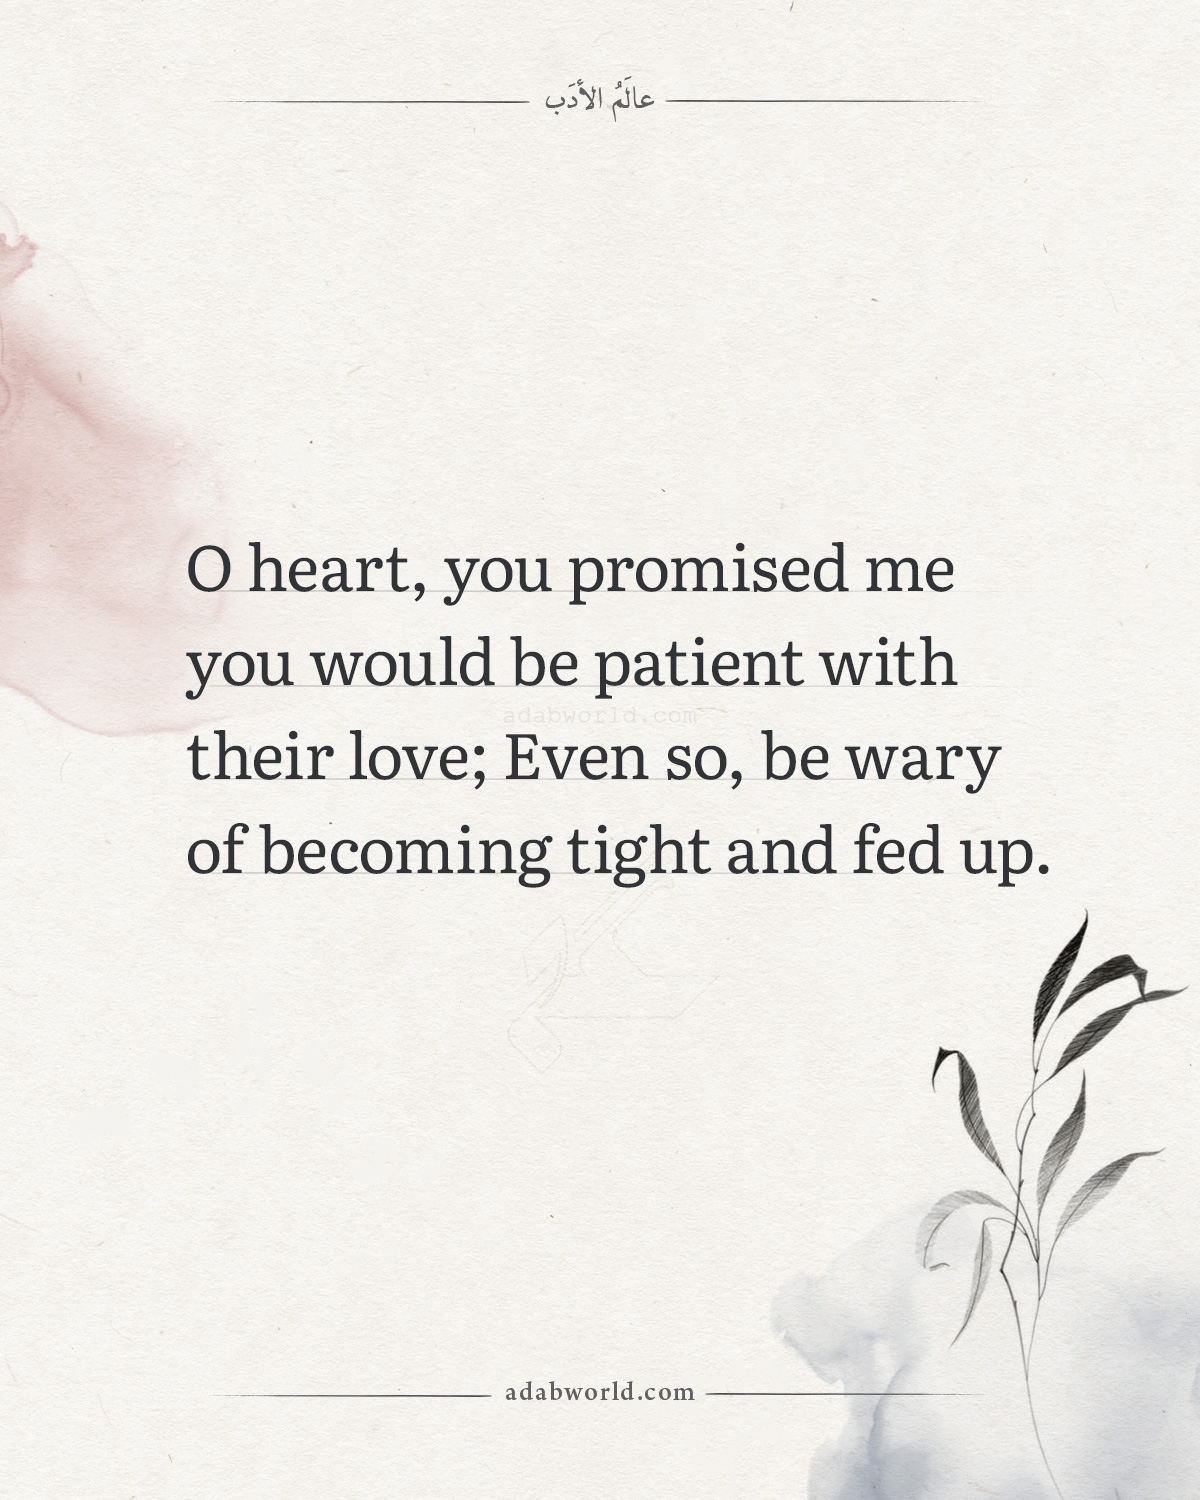 O heart, you promised me you would be patient with their love; even so, be wary of becoming tight and fed up